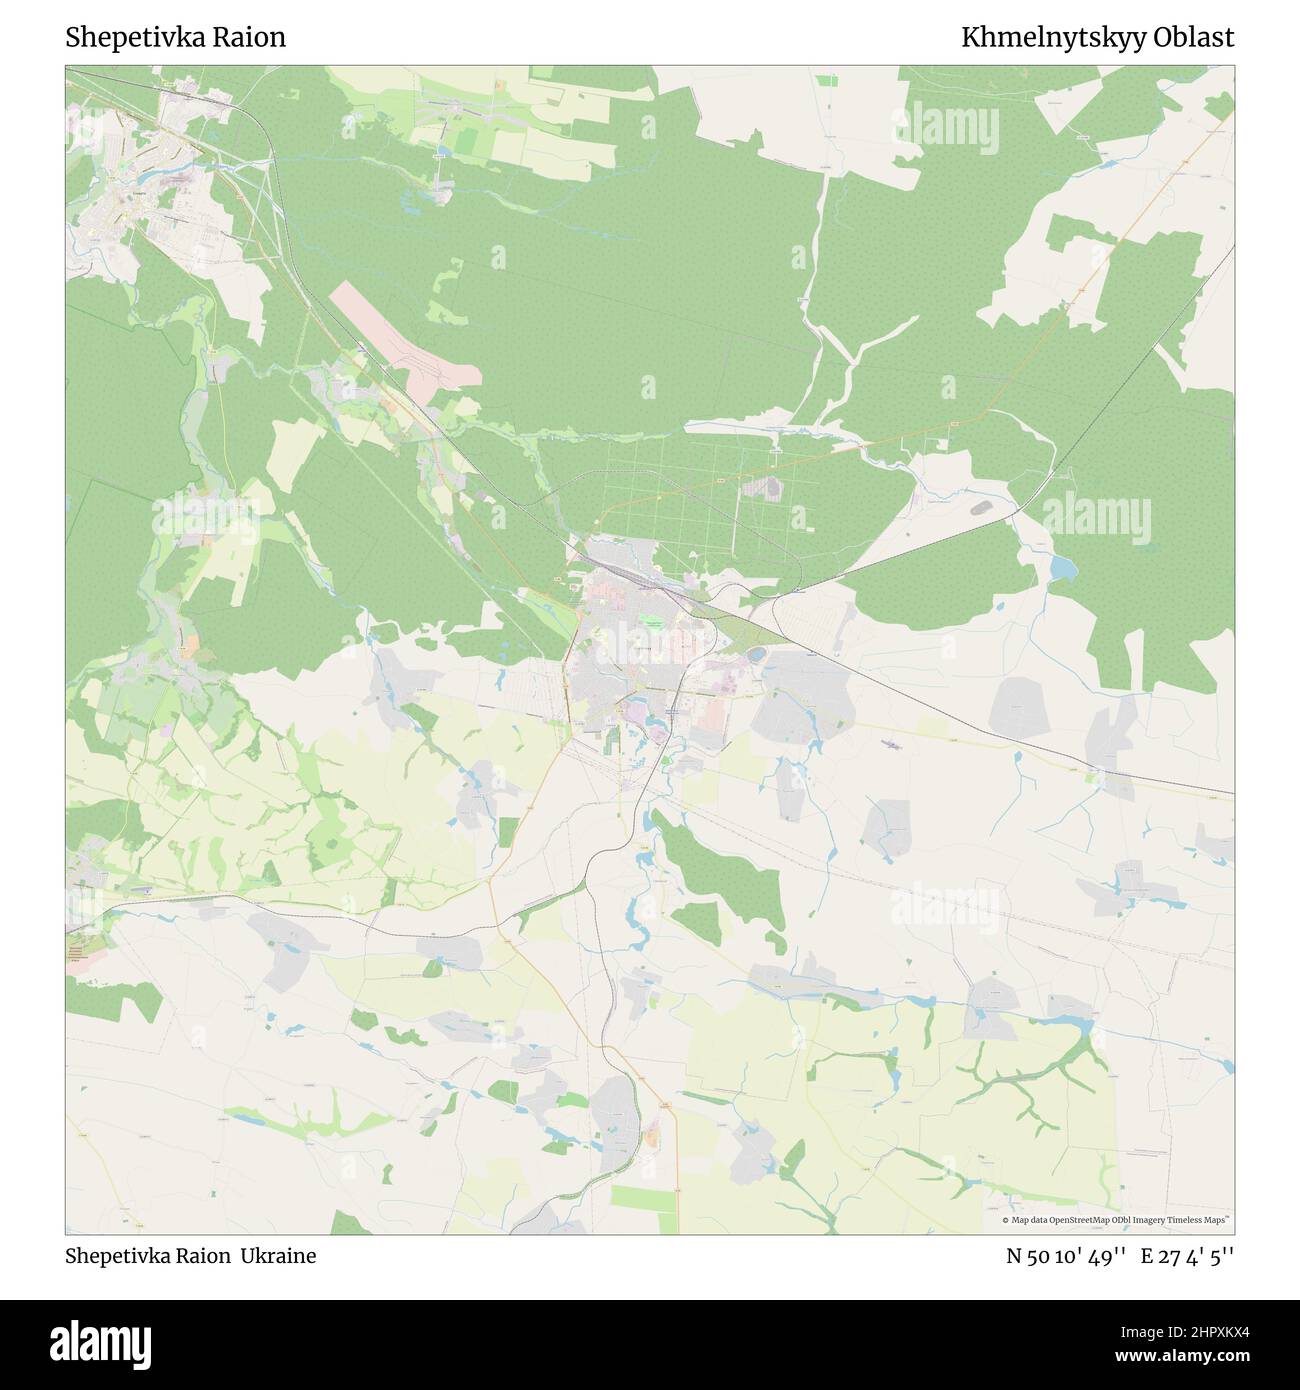 Shepetivka Raion, Shepetivka Raion, Ukraine, Khmelnytskyy Oblast, N 50 10' 49'', E 27 4' 5'', map, Timeless Map published in 2021. Travelers, explorers and adventurers like Florence Nightingale, David Livingstone, Ernest Shackleton, Lewis and Clark and Sherlock Holmes relied on maps to plan travels to the world's most remote corners, Timeless Maps is mapping most locations on the globe, showing the achievement of great dreams Stock Photo